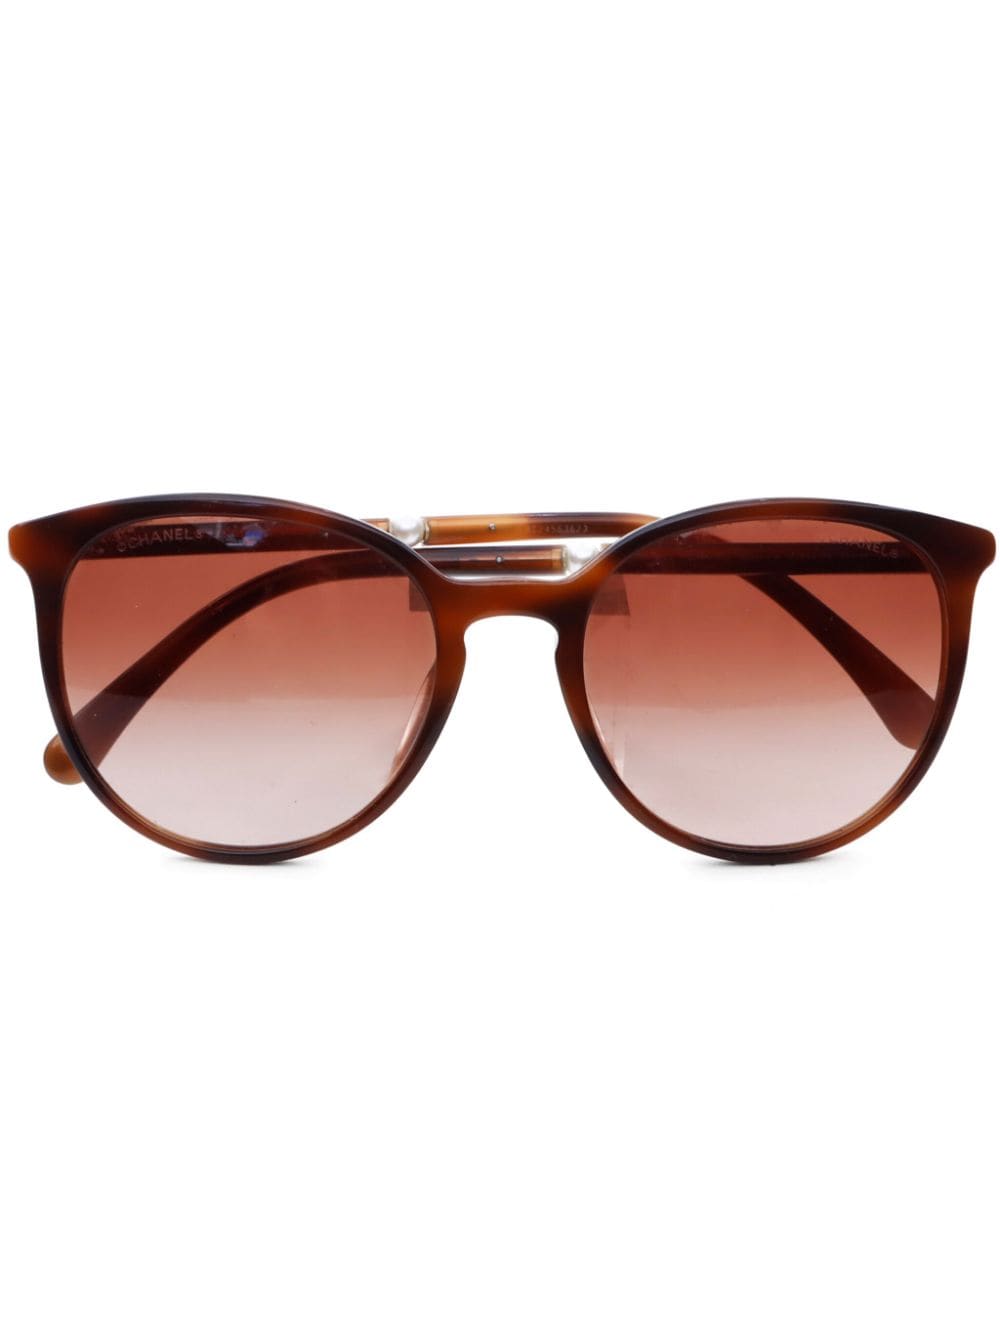 CHANEL Pre-Owned 2000s tortoiseshell-effect round-frame sunglasses - Brown